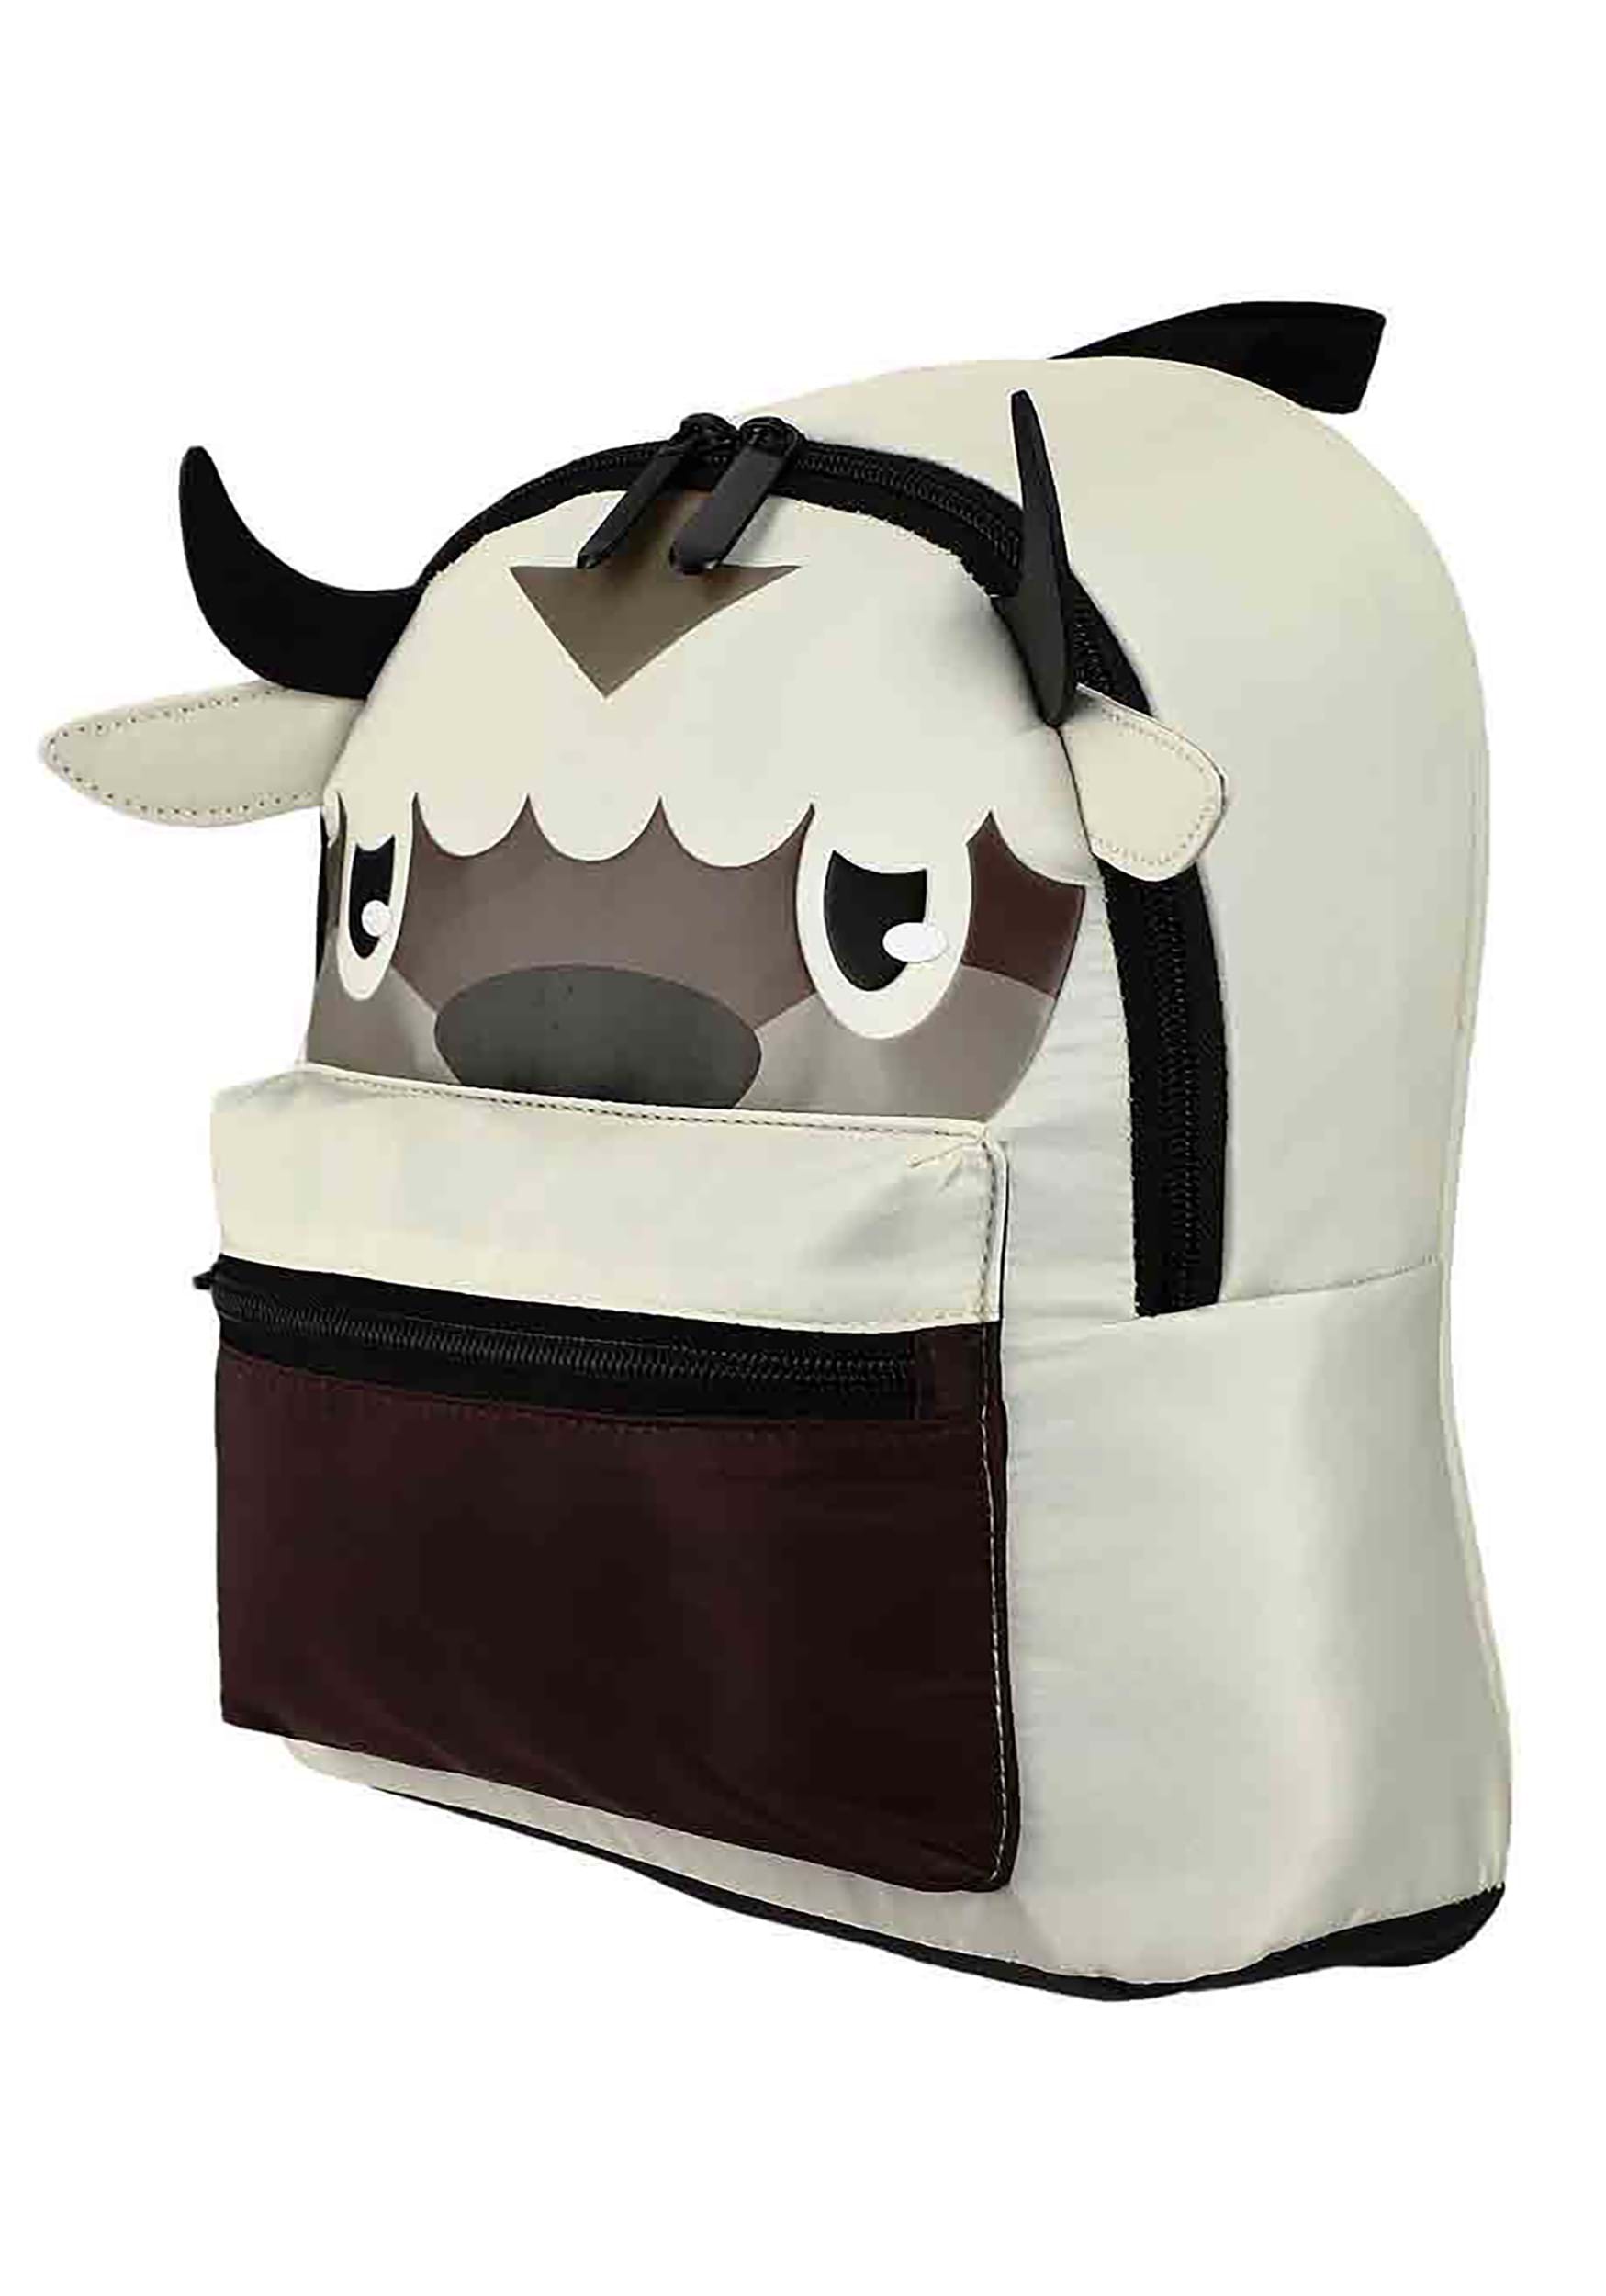 Decorative 3D Mini Backpack From Avatar Last Airbender Of Appa